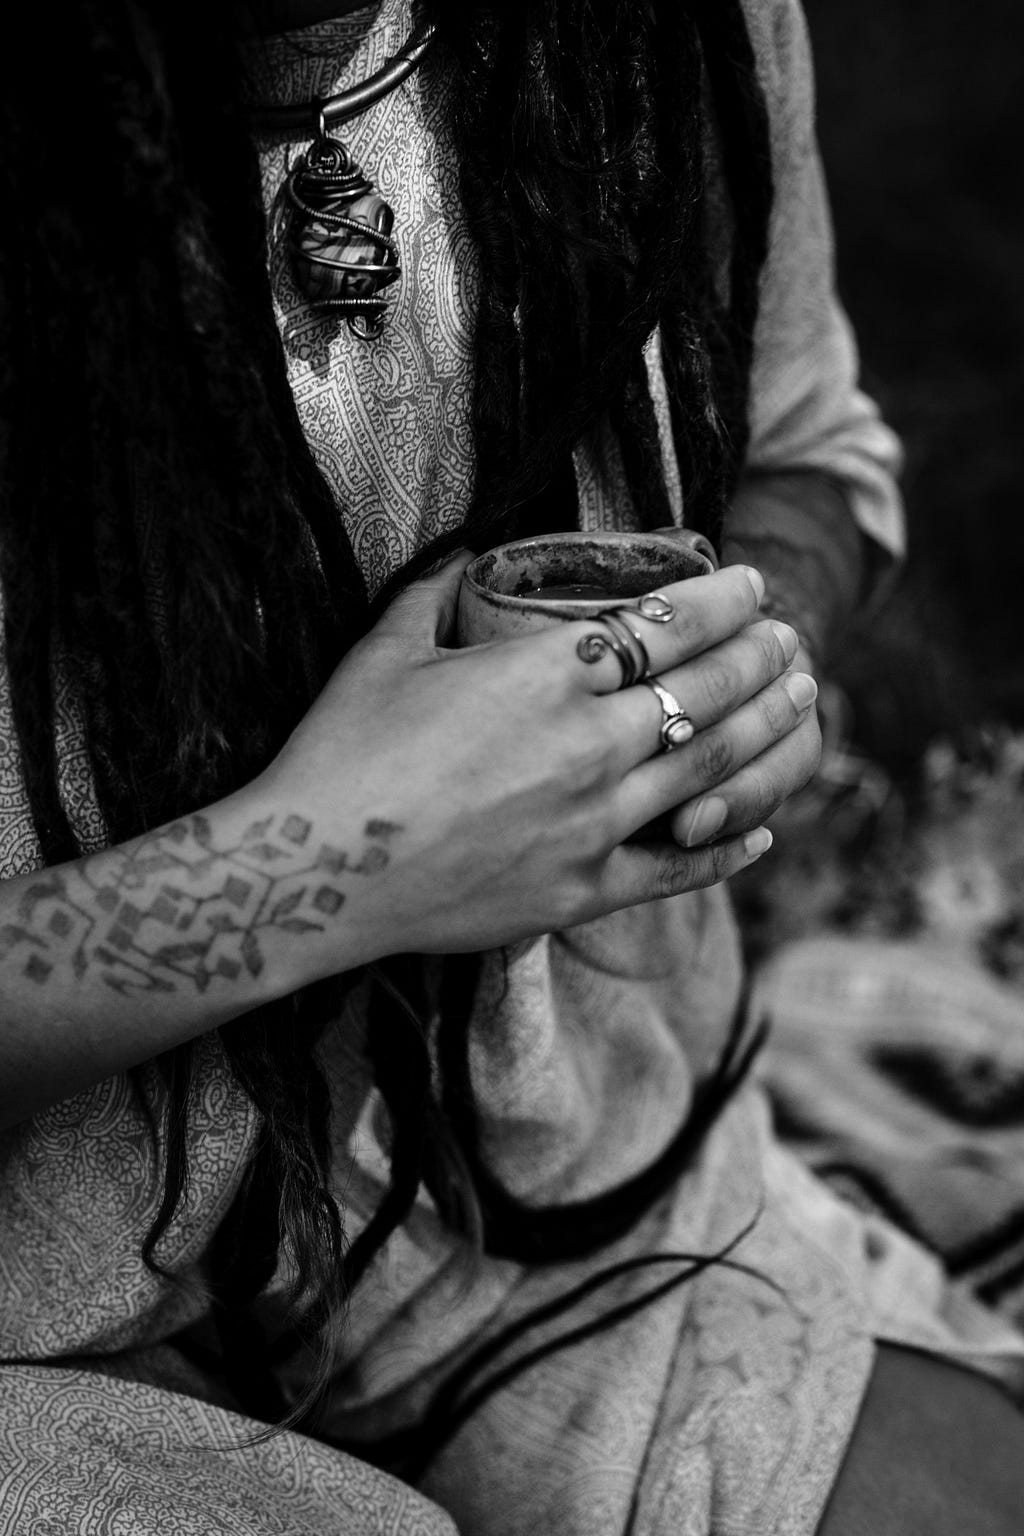 A black and white photo of a close-up of part of a person’s torso and their clasped hands holding what appears to be a small cup. The person has long dark dreadlocks, a tattooed pattern on their arm, and is wearing a light patterned garment, a necklace with a pendant bound in wire, and two finger rings.